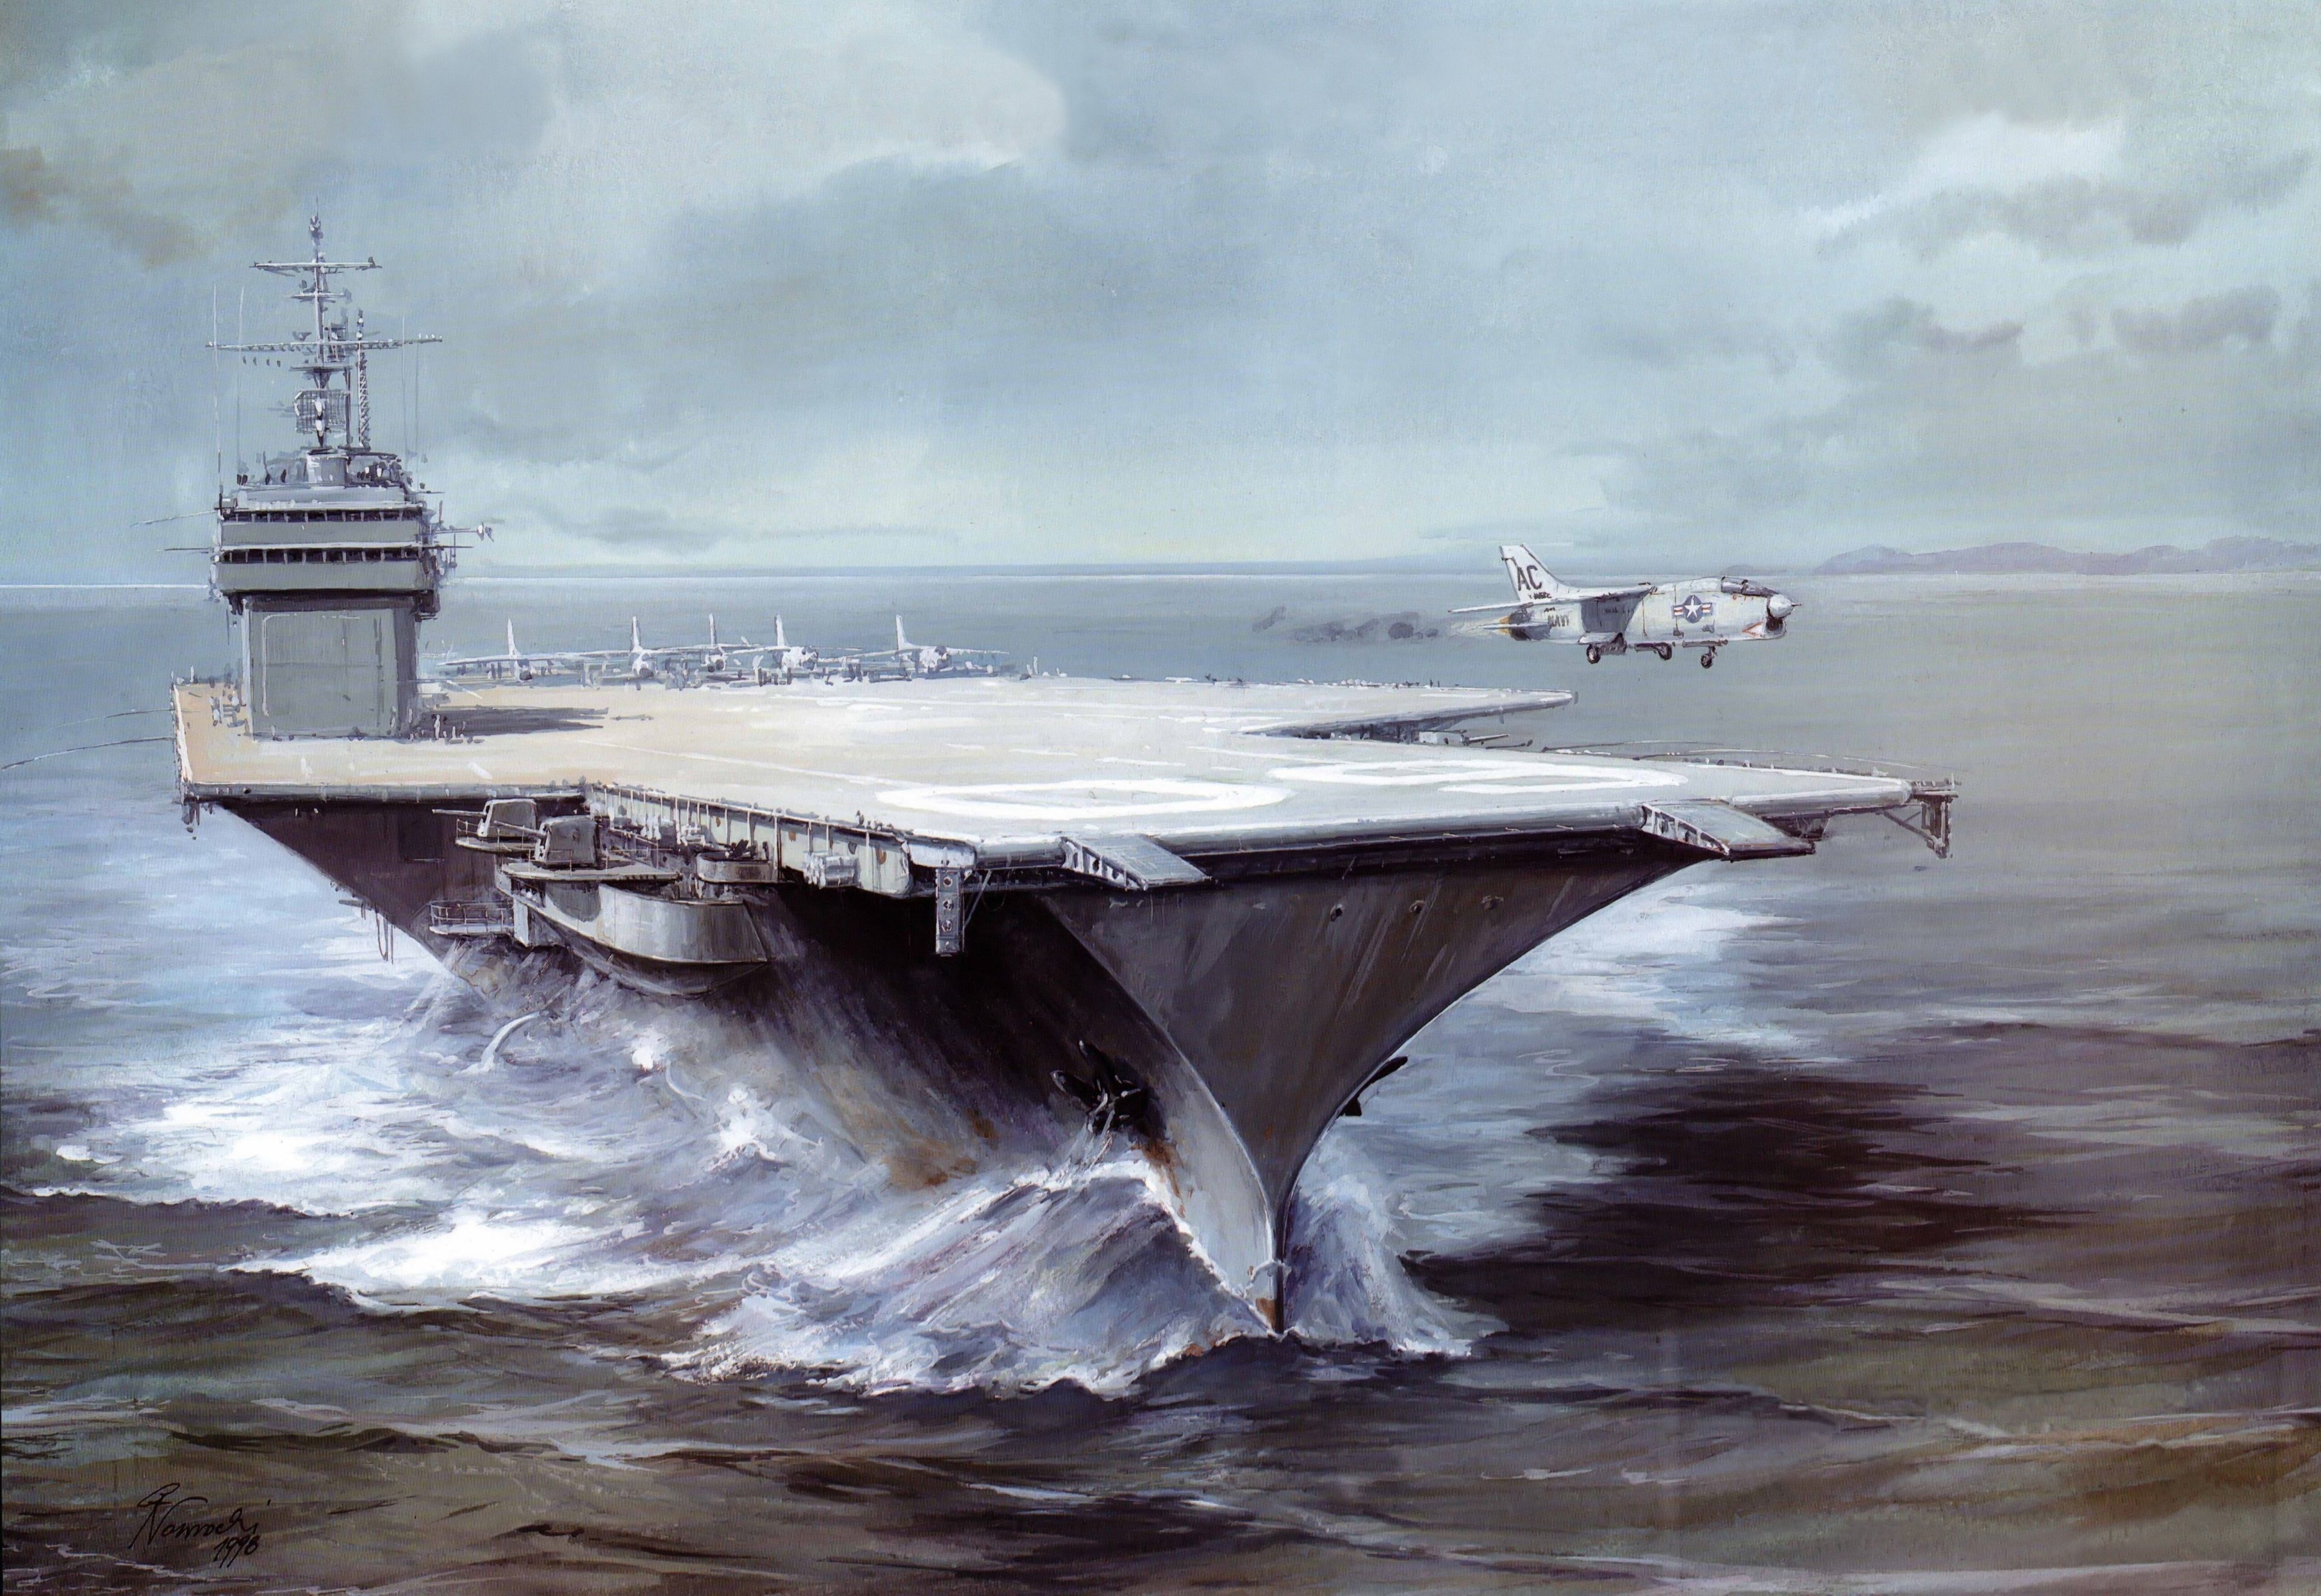 The US still needs aircraft carriers